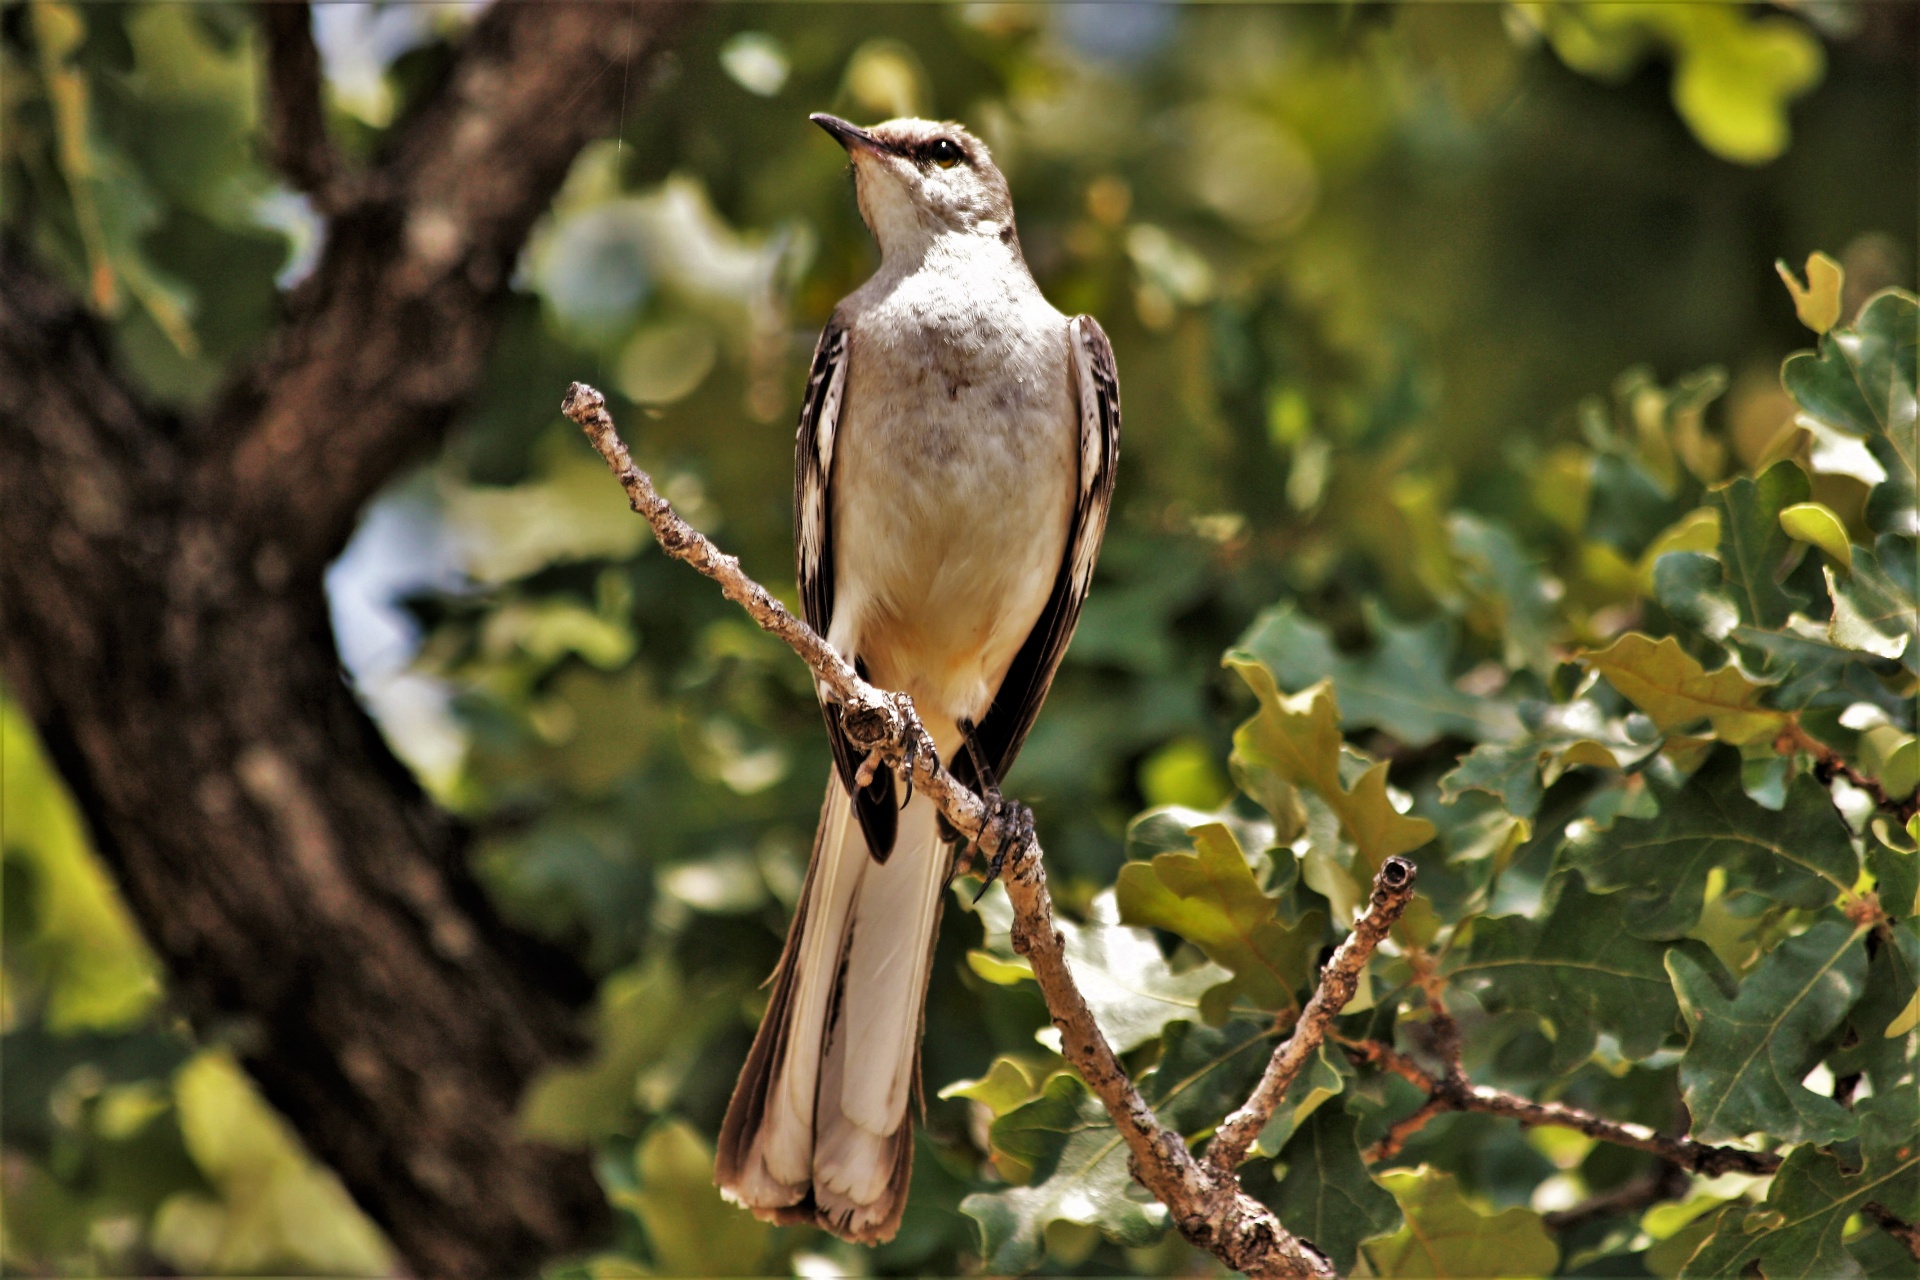 Portrait of a gray and white mockingbird as he sits on tree branch of an oak tree, with green leaves in the background.